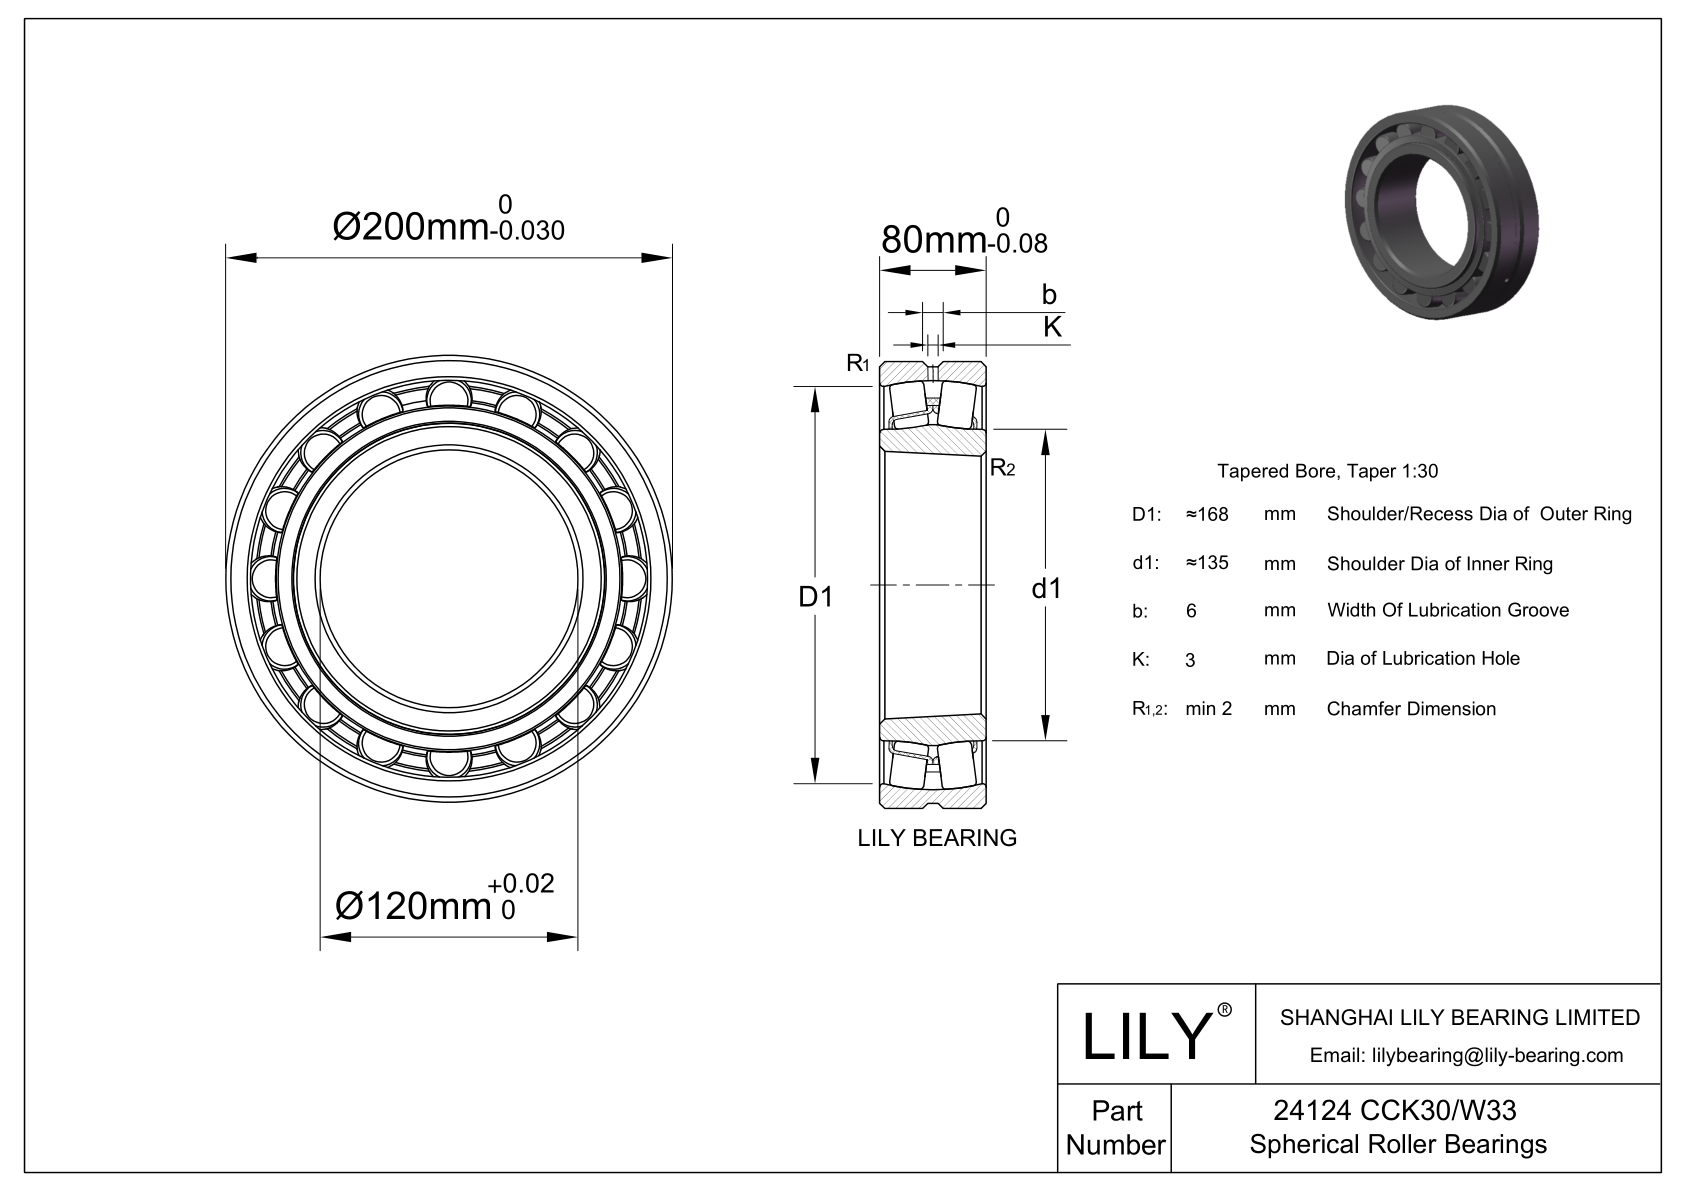 24124 CCK30/W33 Double Row Spherical Roller Bearing cad drawing